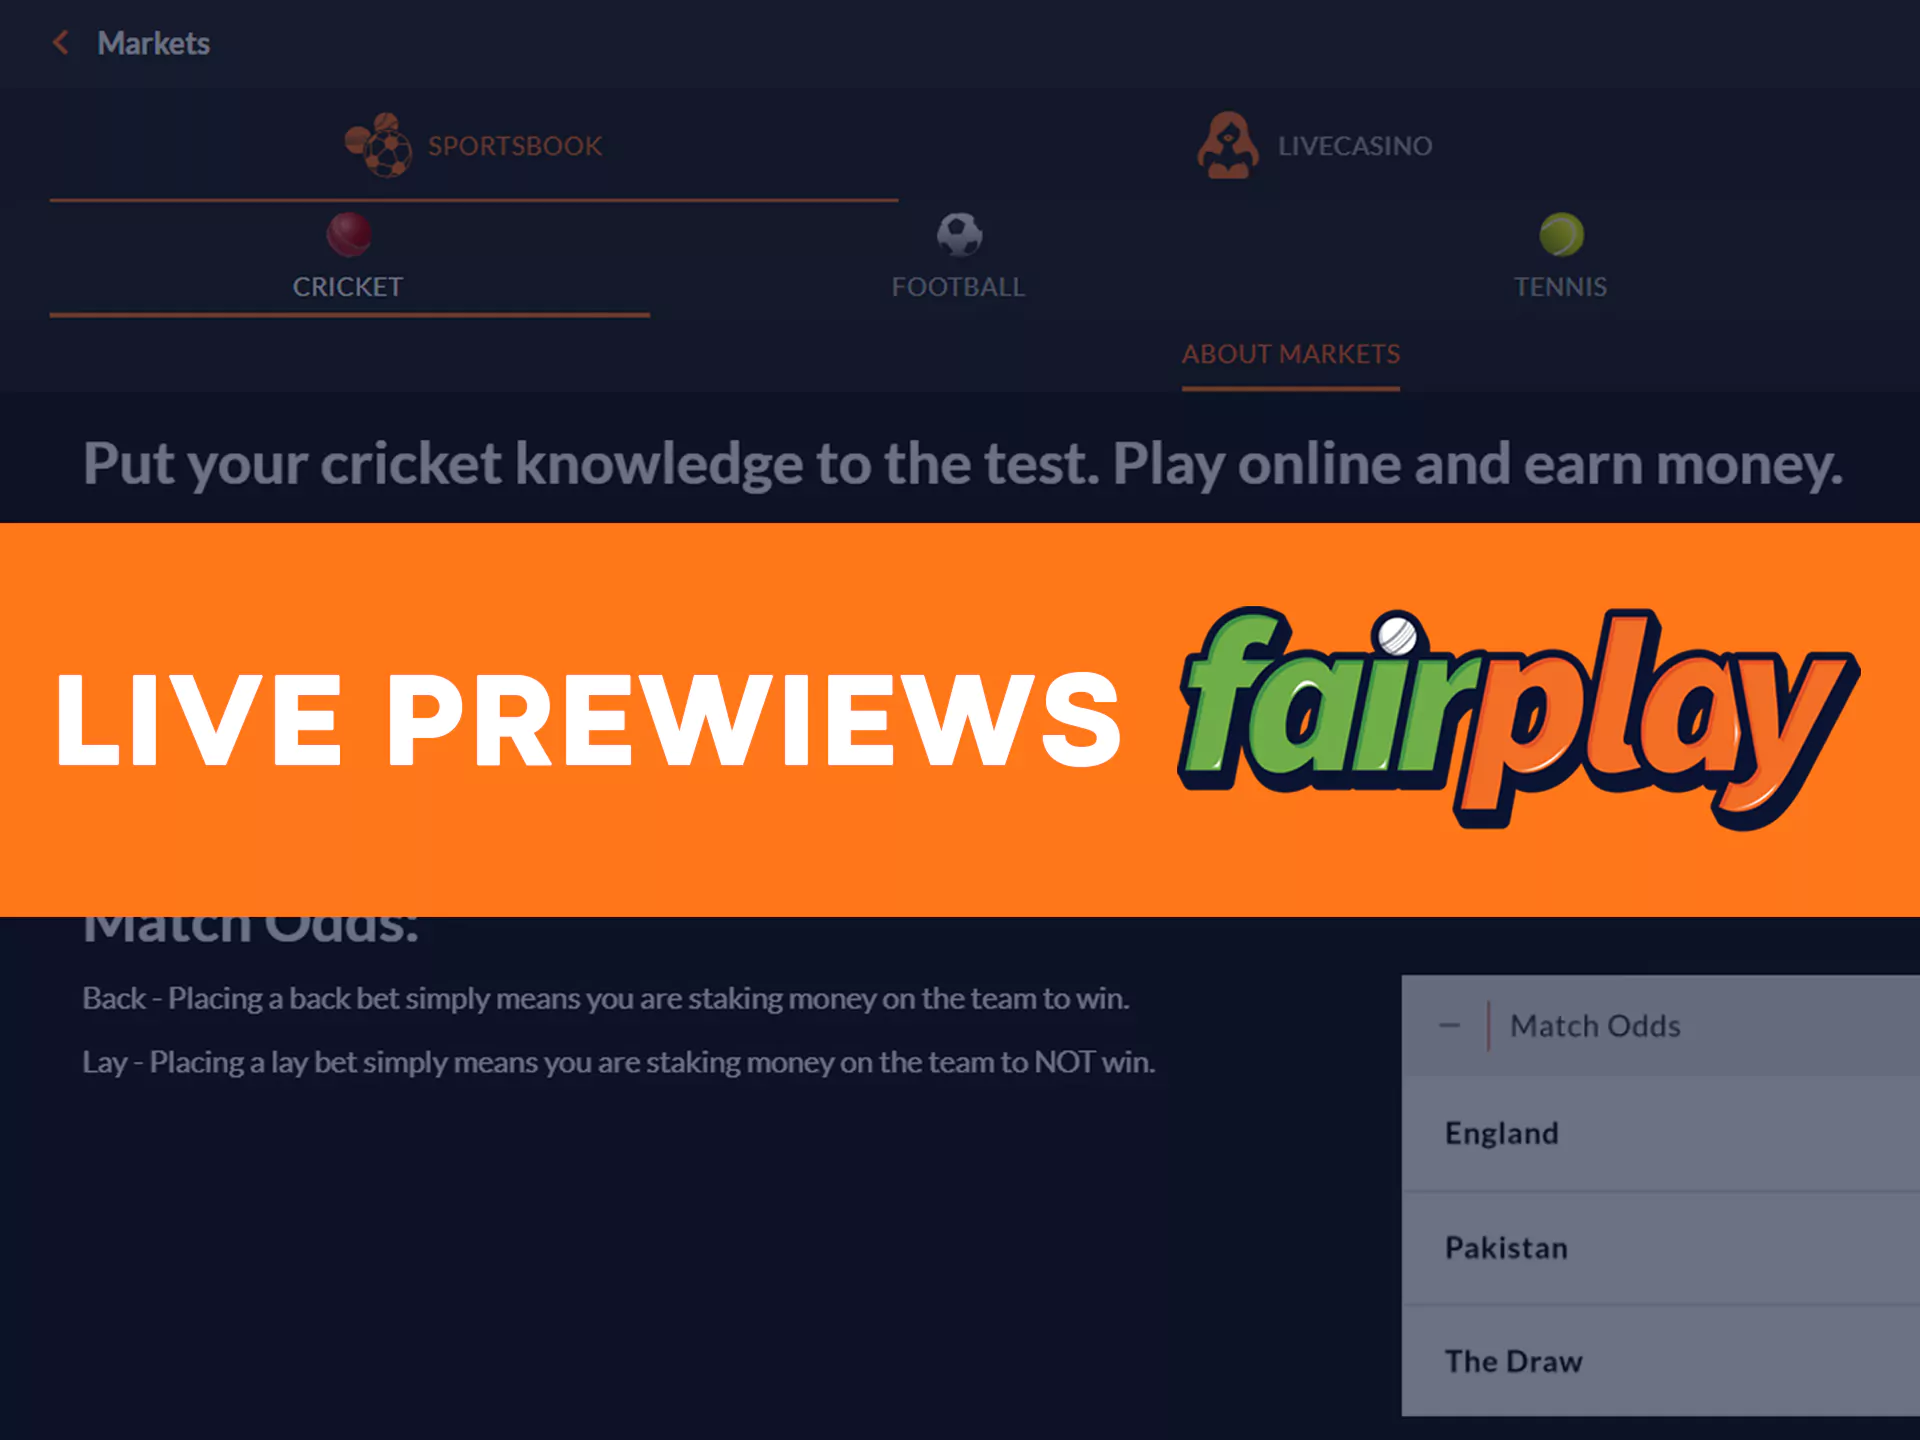 Know about game without checking at Fairplay.